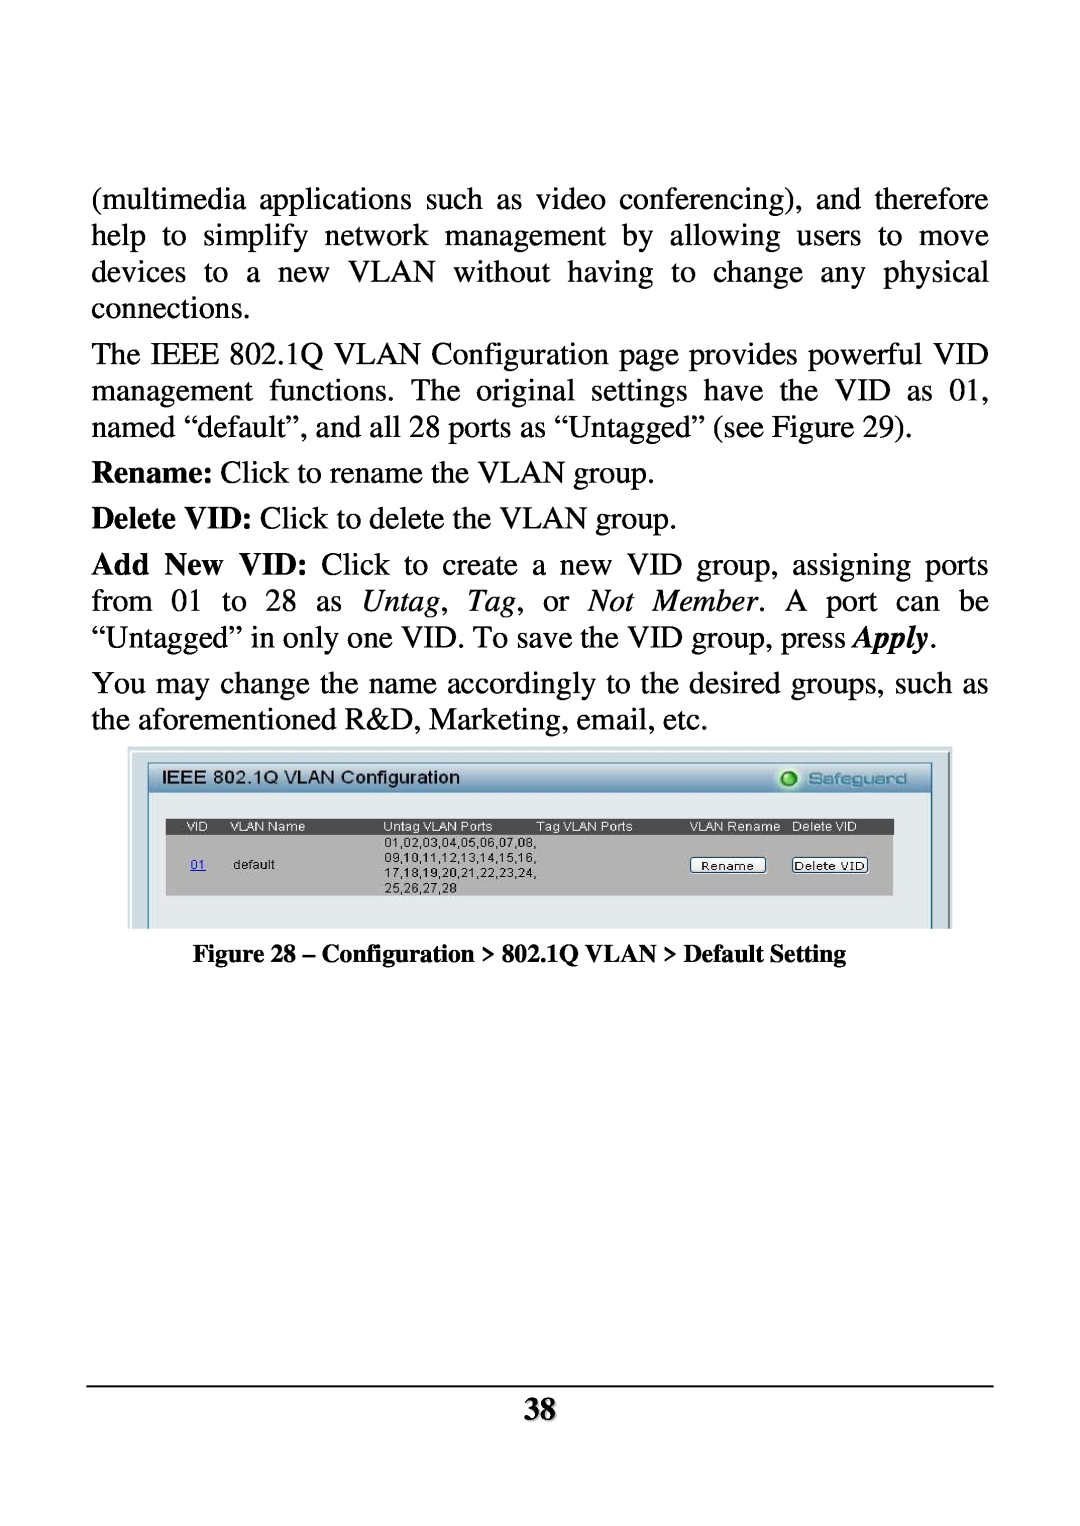 D-Link DES-1228 user manual Rename Click to rename the VLAN group 